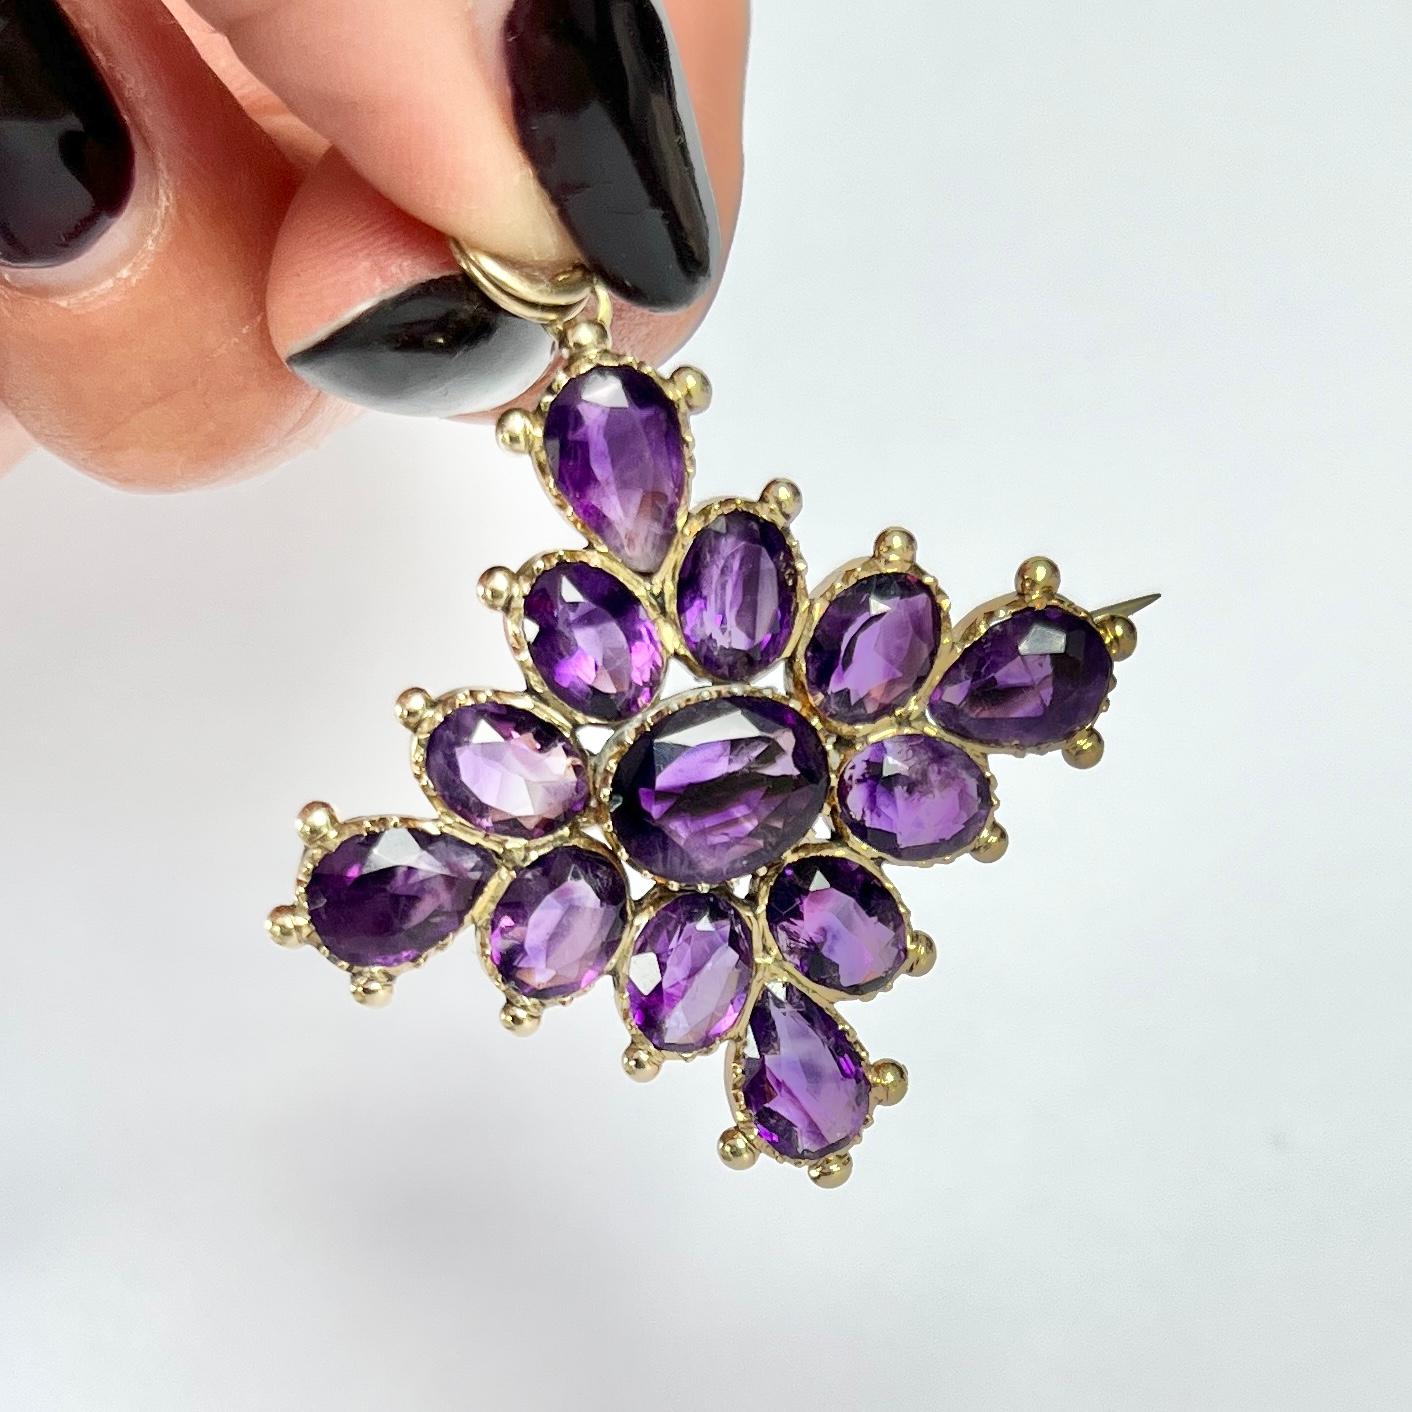 This gorgeous pendant or brooch holds 13 bright purple amethyst stones which total approx 8.5ct. The stones are completed by the 9carat yellow gold decorative setting.  

Dimensions: 33x33mm

Weight: 7.4g